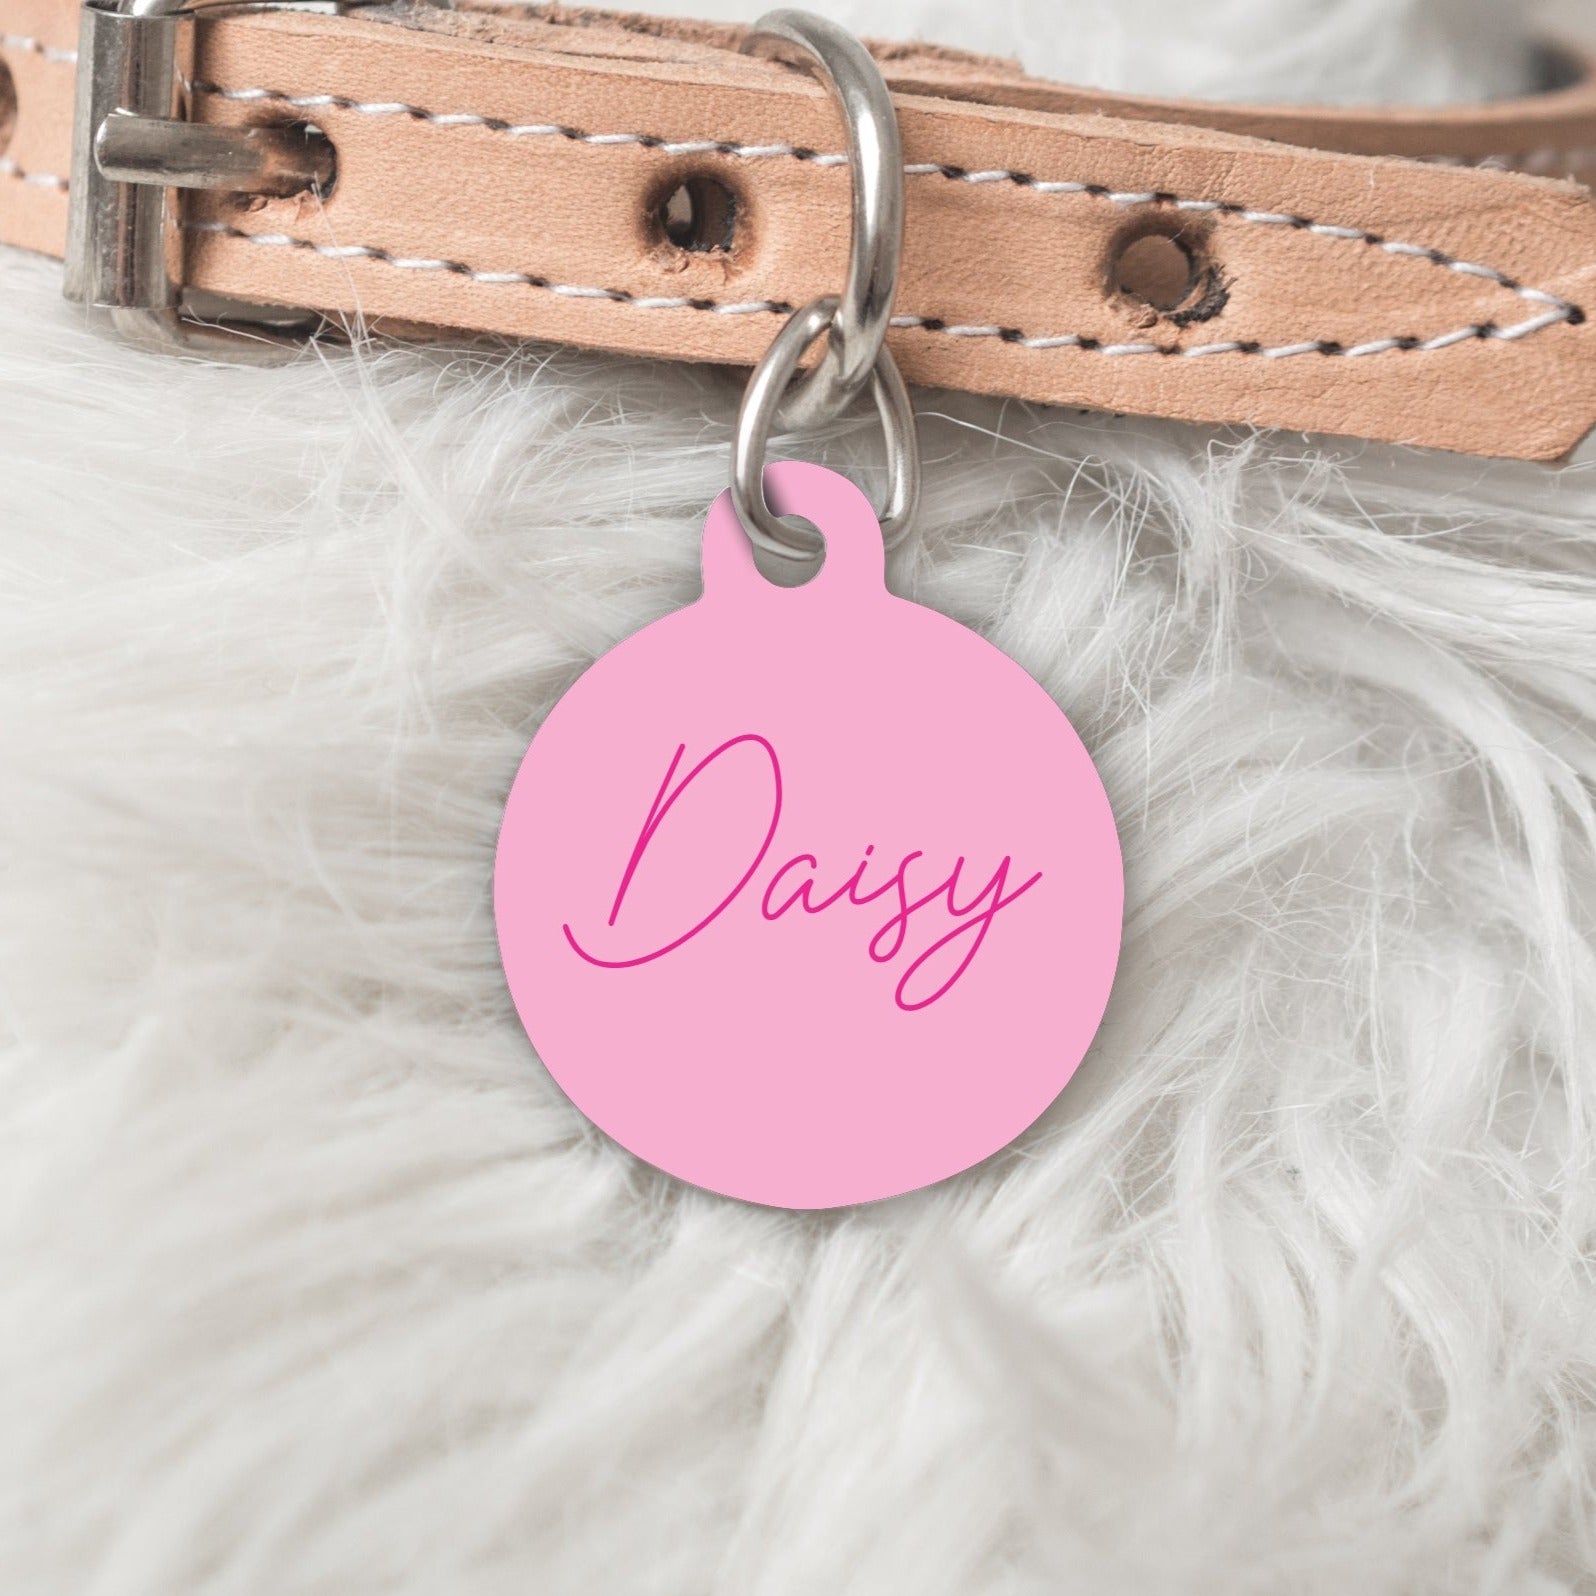 Personalised Pet Dog Cat ID Tag